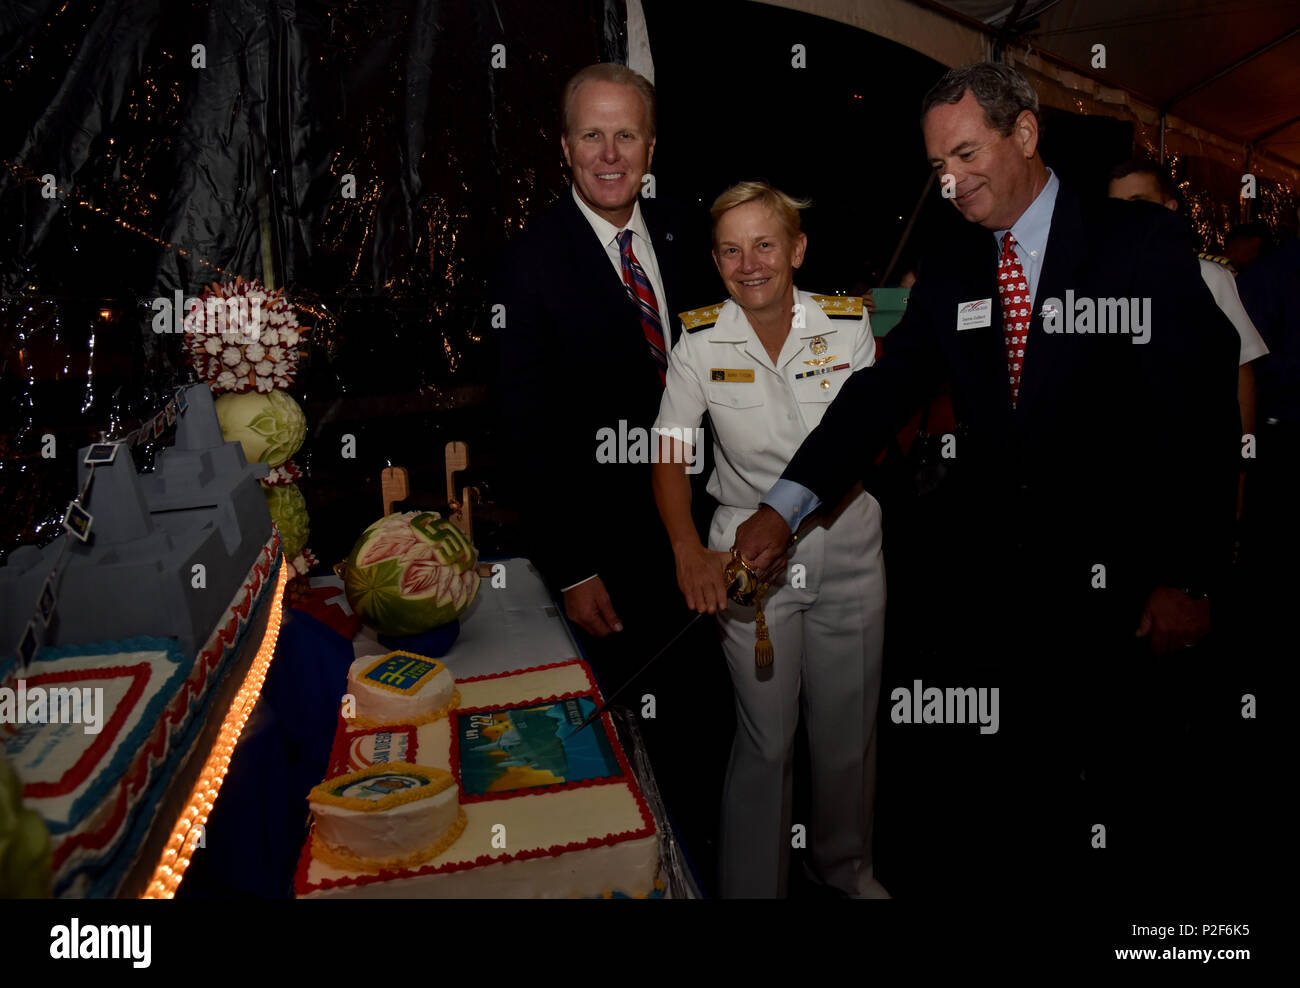 160912-N-HK946-139 SAN DIEGO (Sept. 12, 2016) – San Diego Mayor Kevin Faulconer, Vice Adm. Nora Tyson, commander, U.S. 3rd Fleet, and Dennis DuBard, president of the Fleet Week San Diego Board of Directors, cut a cake during a reception aboard amphibious transport dock ship USS San Diego (LPD 22), during San Diego Fleet Week 2016. Fleet week offers the public an opportunity to meet Sailors, Marines, and members of the Coast Guard and gain a better understanding of how the sea services support the national defense of the United States and freedom of the seas. (U.S. Navy photo by Mass Communicat Stock Photo